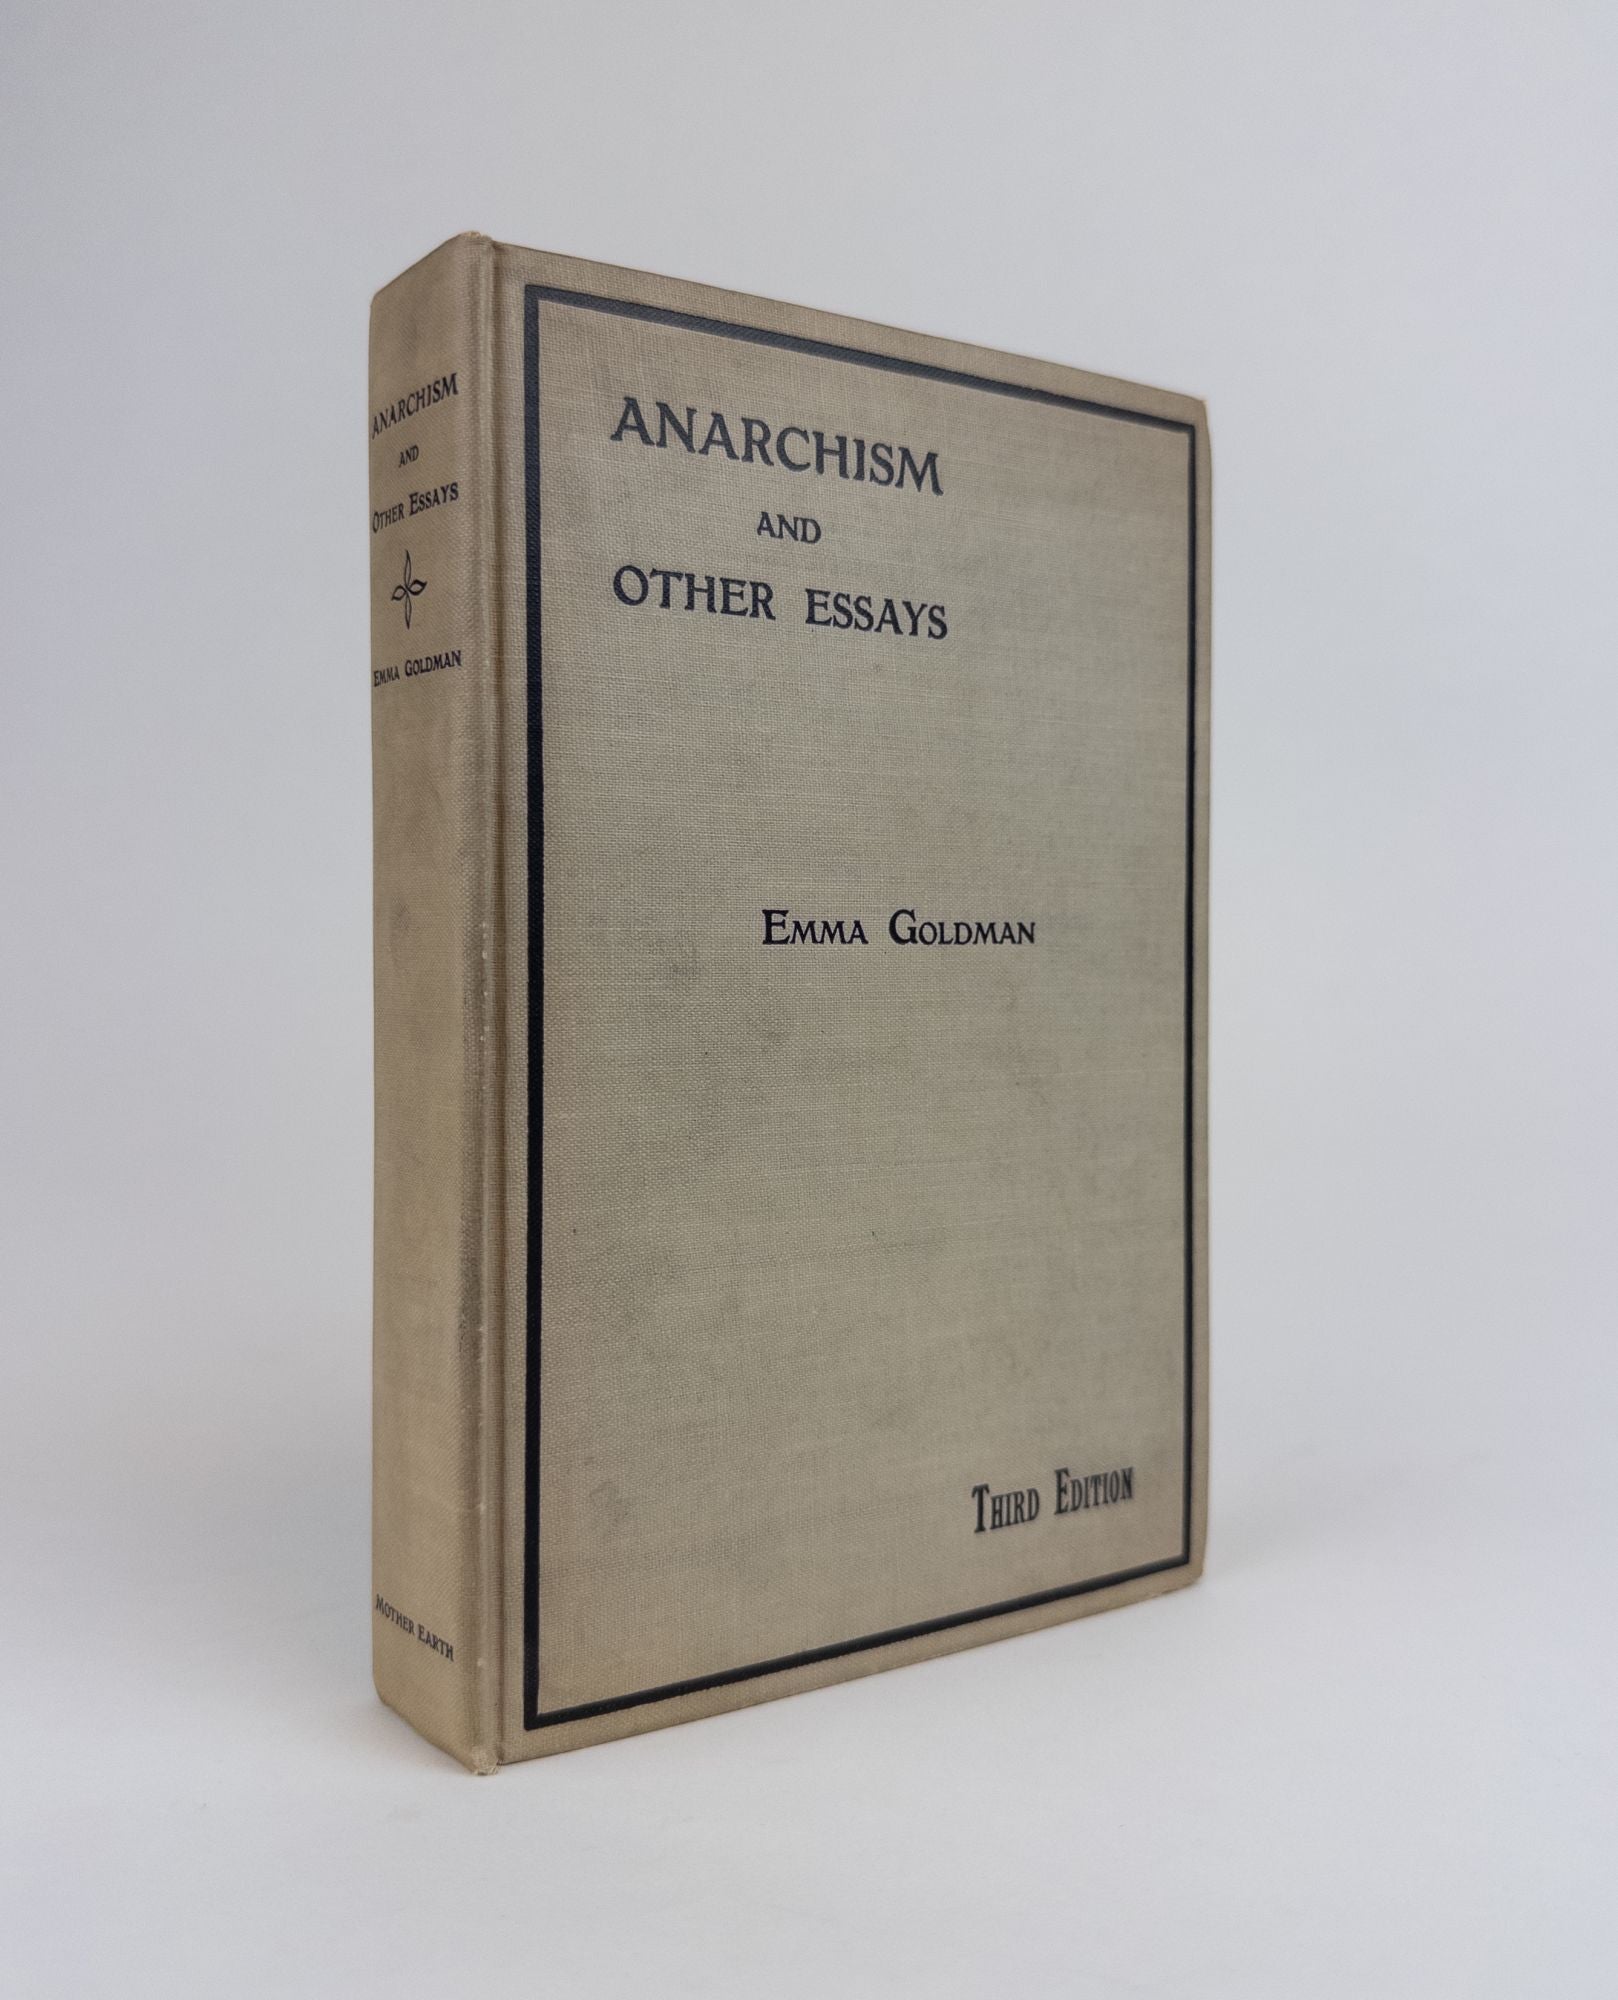 Product Image for ANARCHISM AND OTHER ESSAYS [SIGNED]